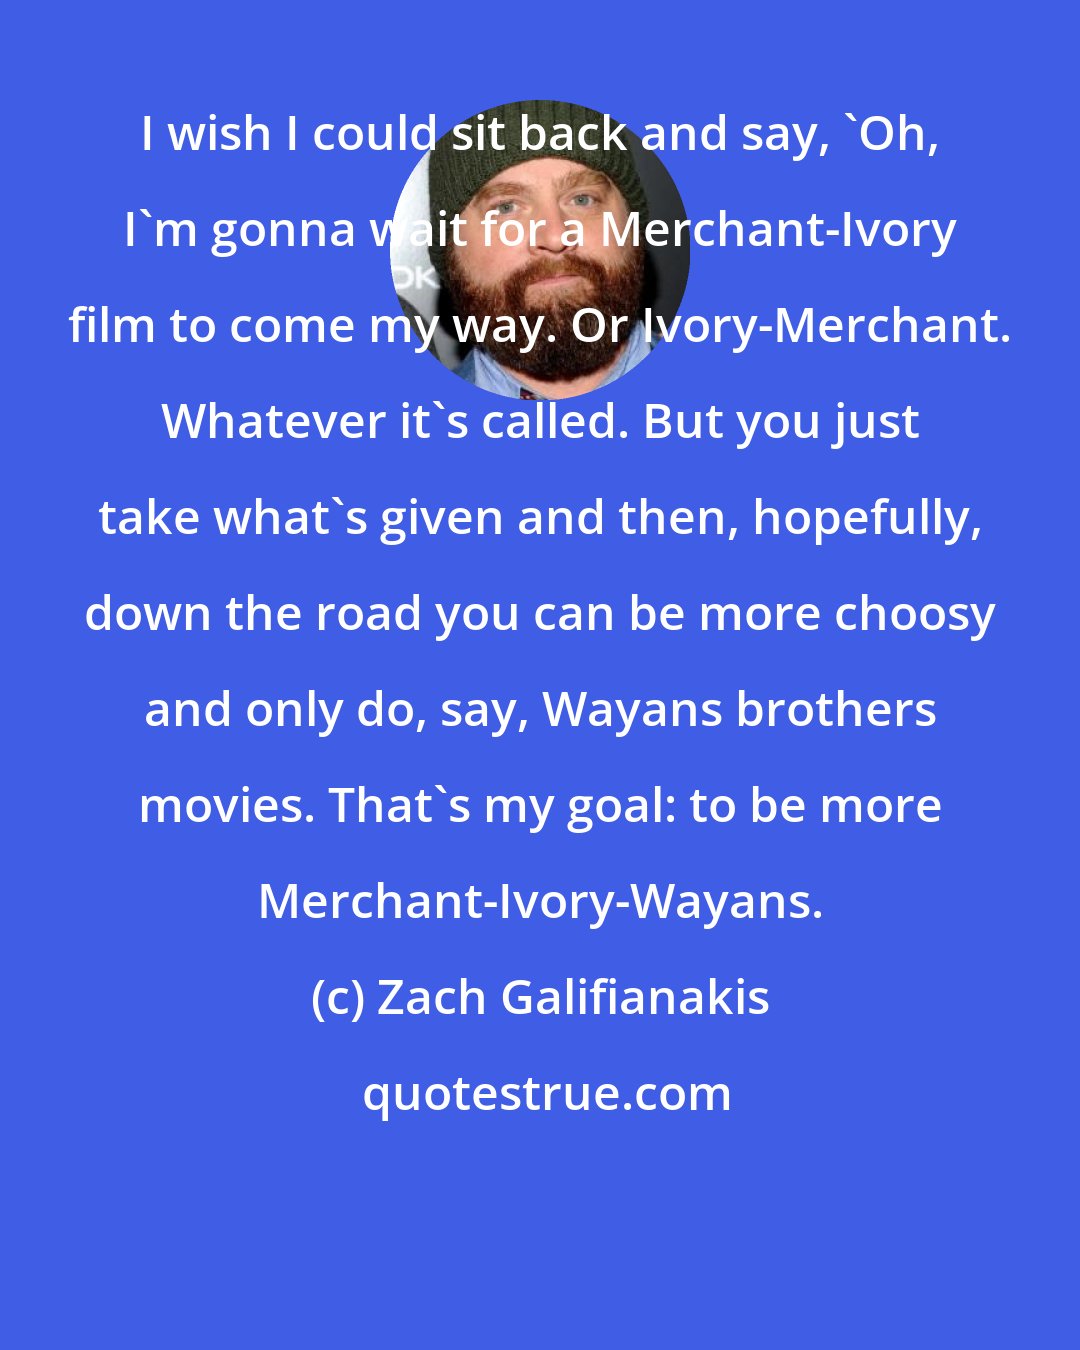 Zach Galifianakis: I wish I could sit back and say, 'Oh, I'm gonna wait for a Merchant-Ivory film to come my way. Or Ivory-Merchant. Whatever it's called. But you just take what's given and then, hopefully, down the road you can be more choosy and only do, say, Wayans brothers movies. That's my goal: to be more Merchant-Ivory-Wayans.